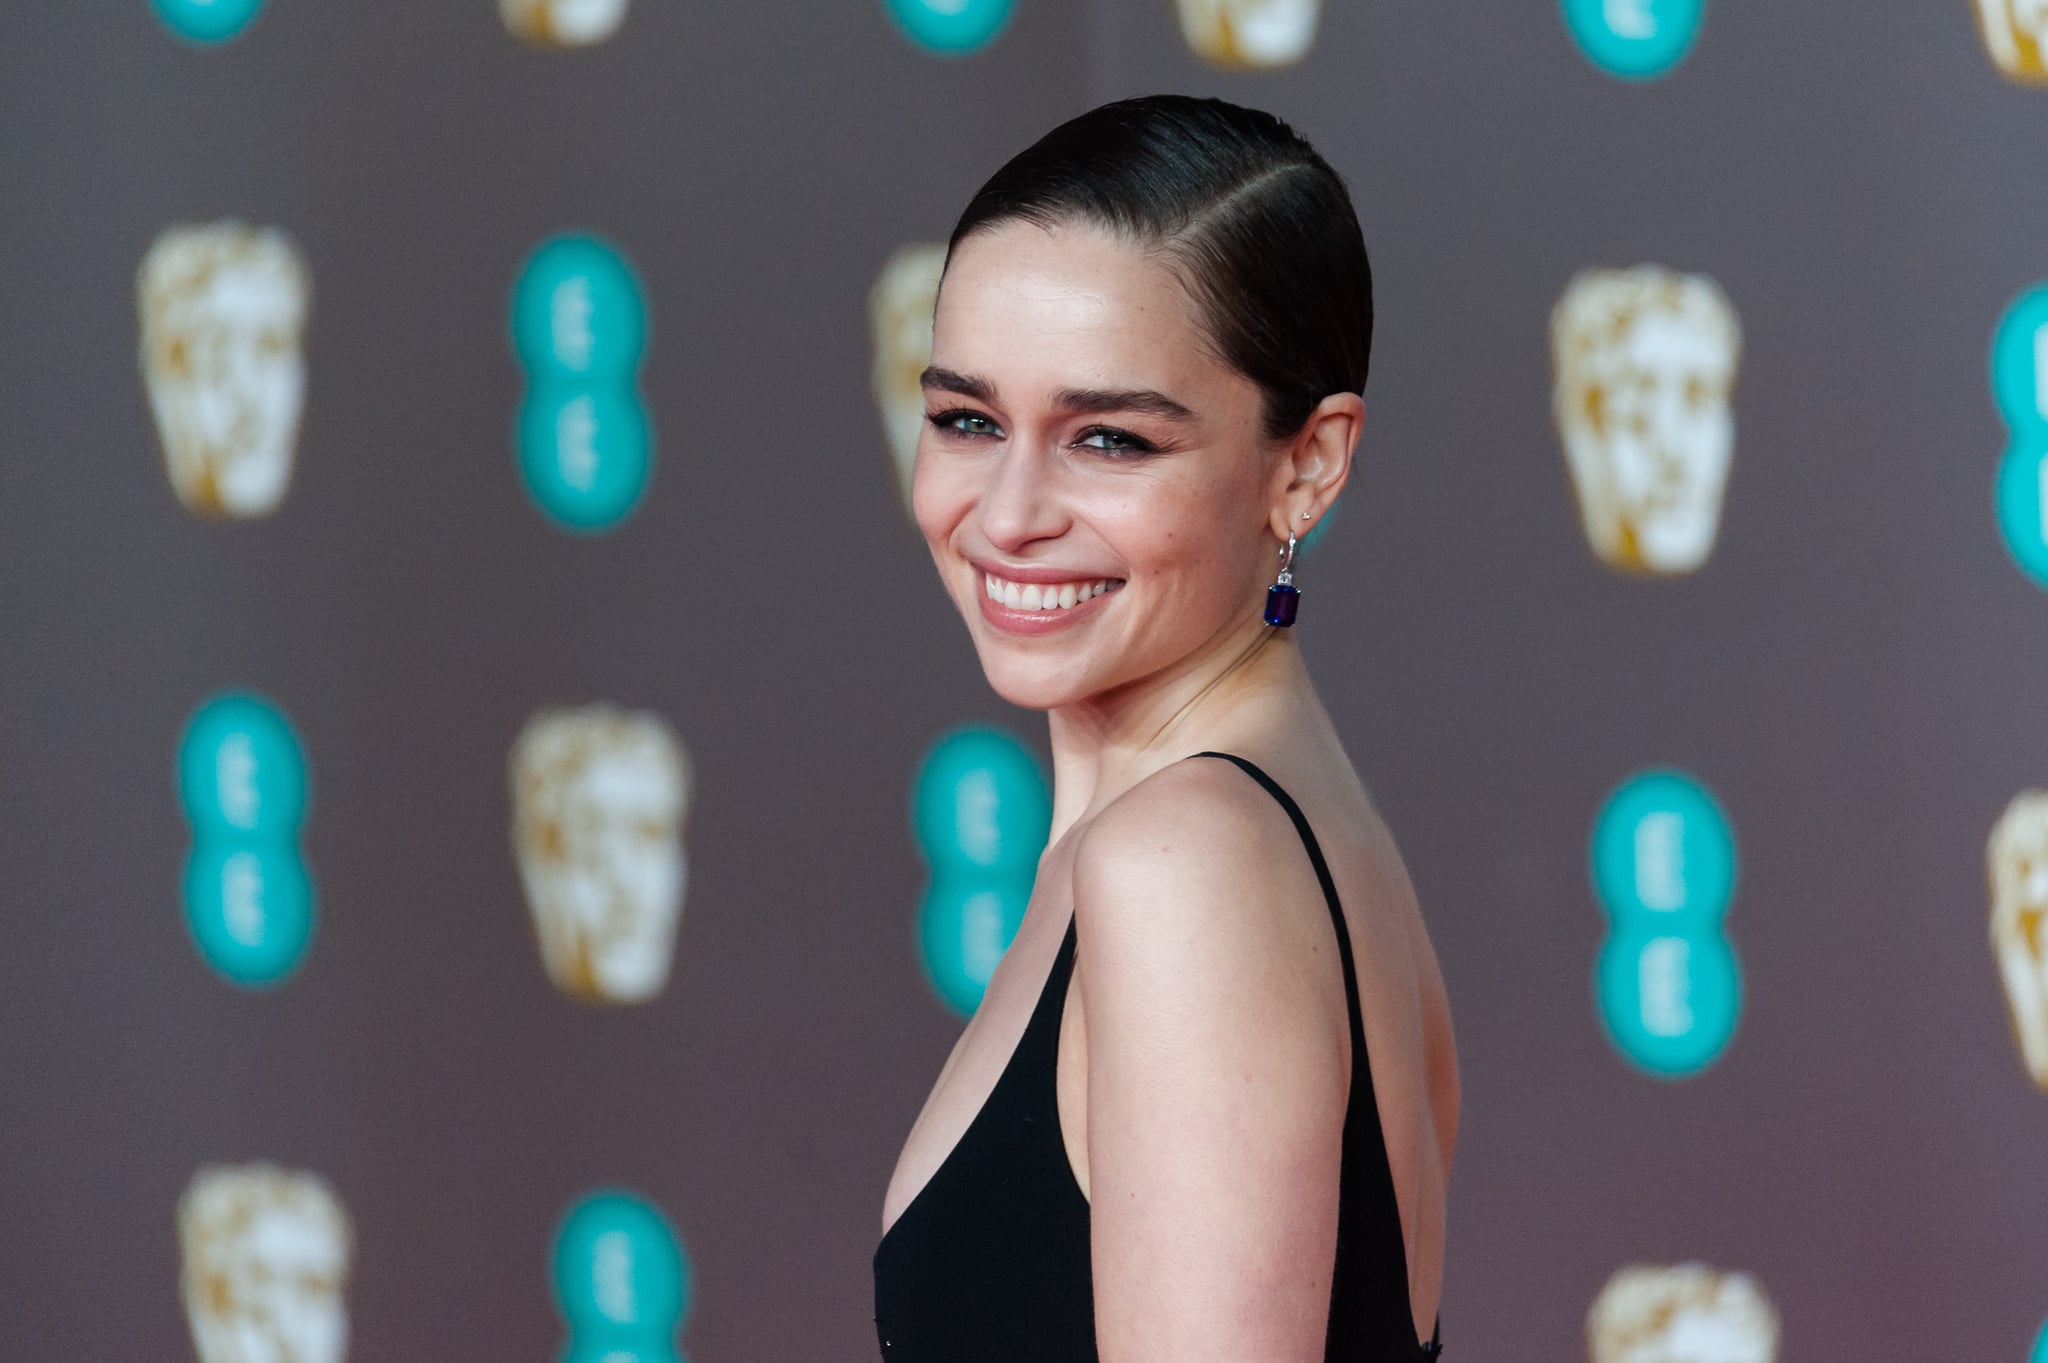 Emilia Clarke Thanks Healthcare Workers Who Saved Her Life After Serious Brain Injuries